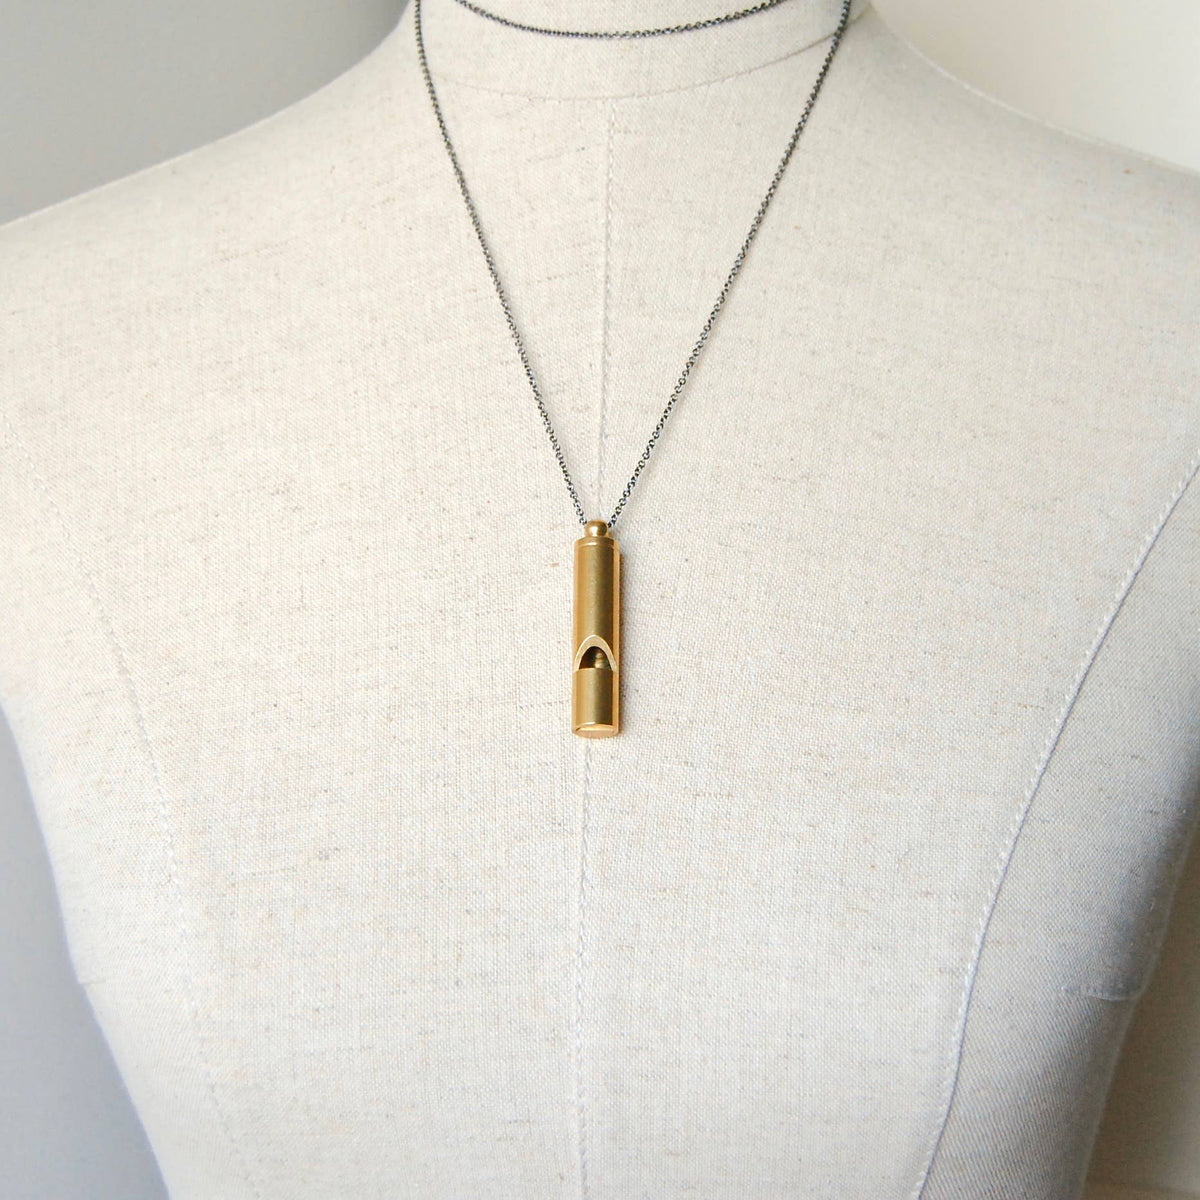 Loud Whistle Necklace